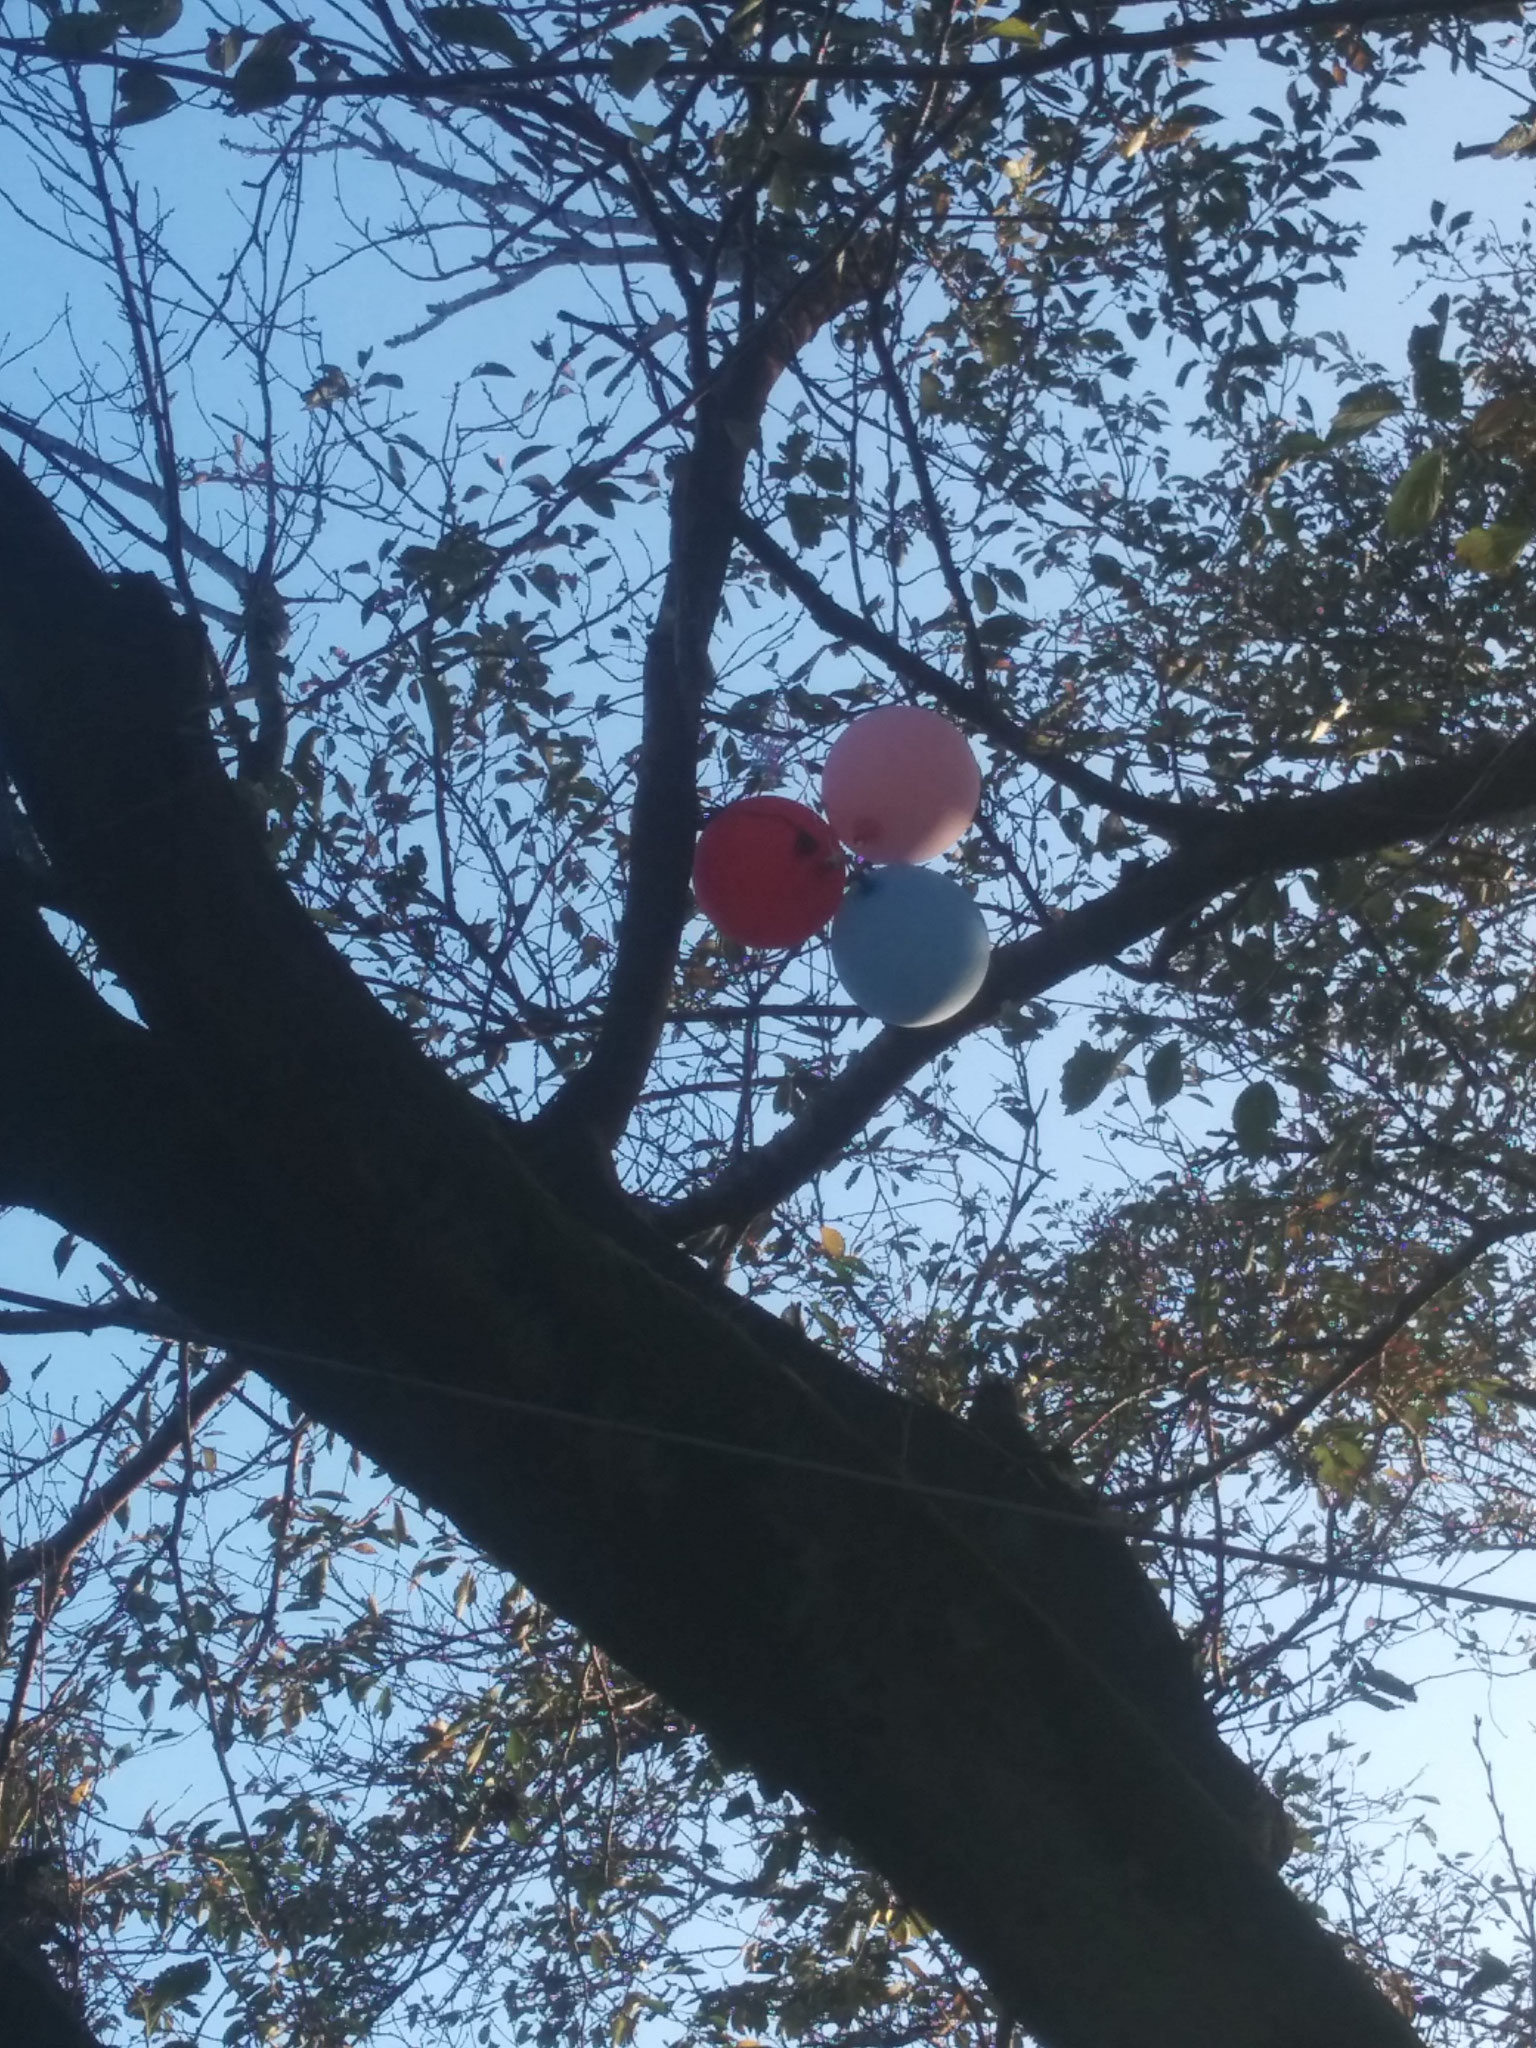 8 My hostbro lost these balloons (he doesn't know about helium)